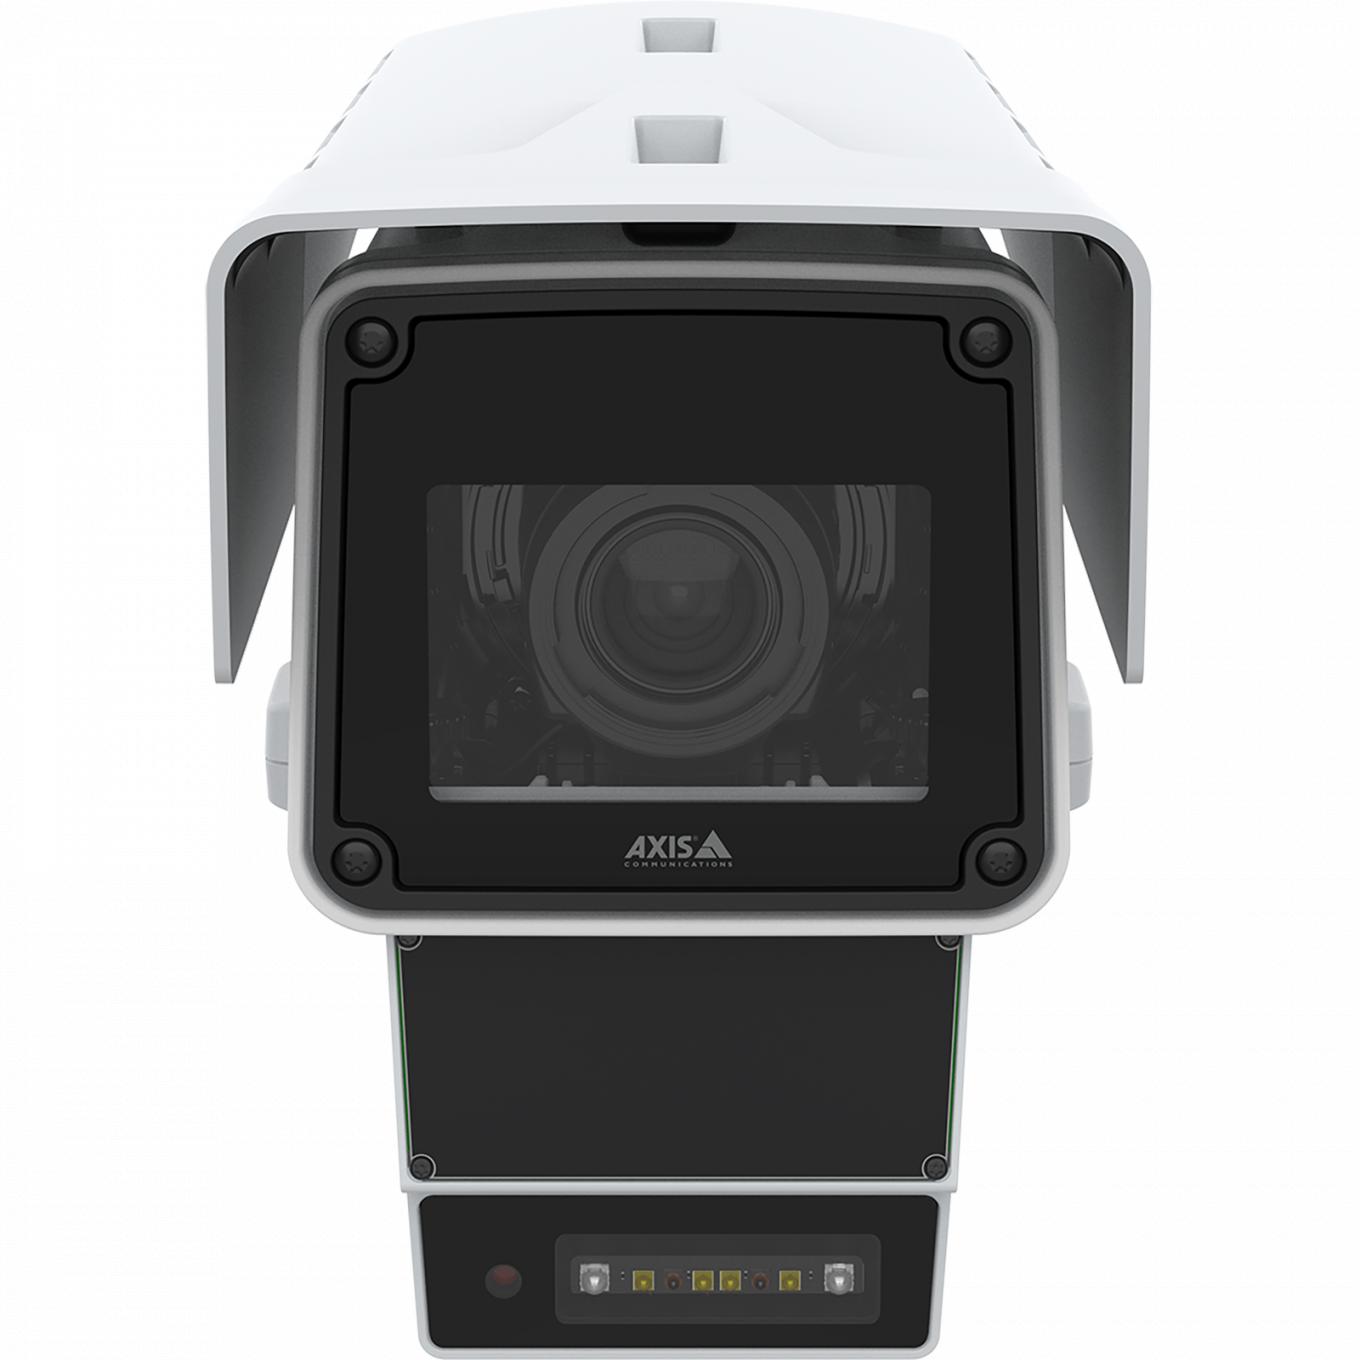 AXIS Q1656-DLE Radar-Video Fusion Camera, viewed from its front